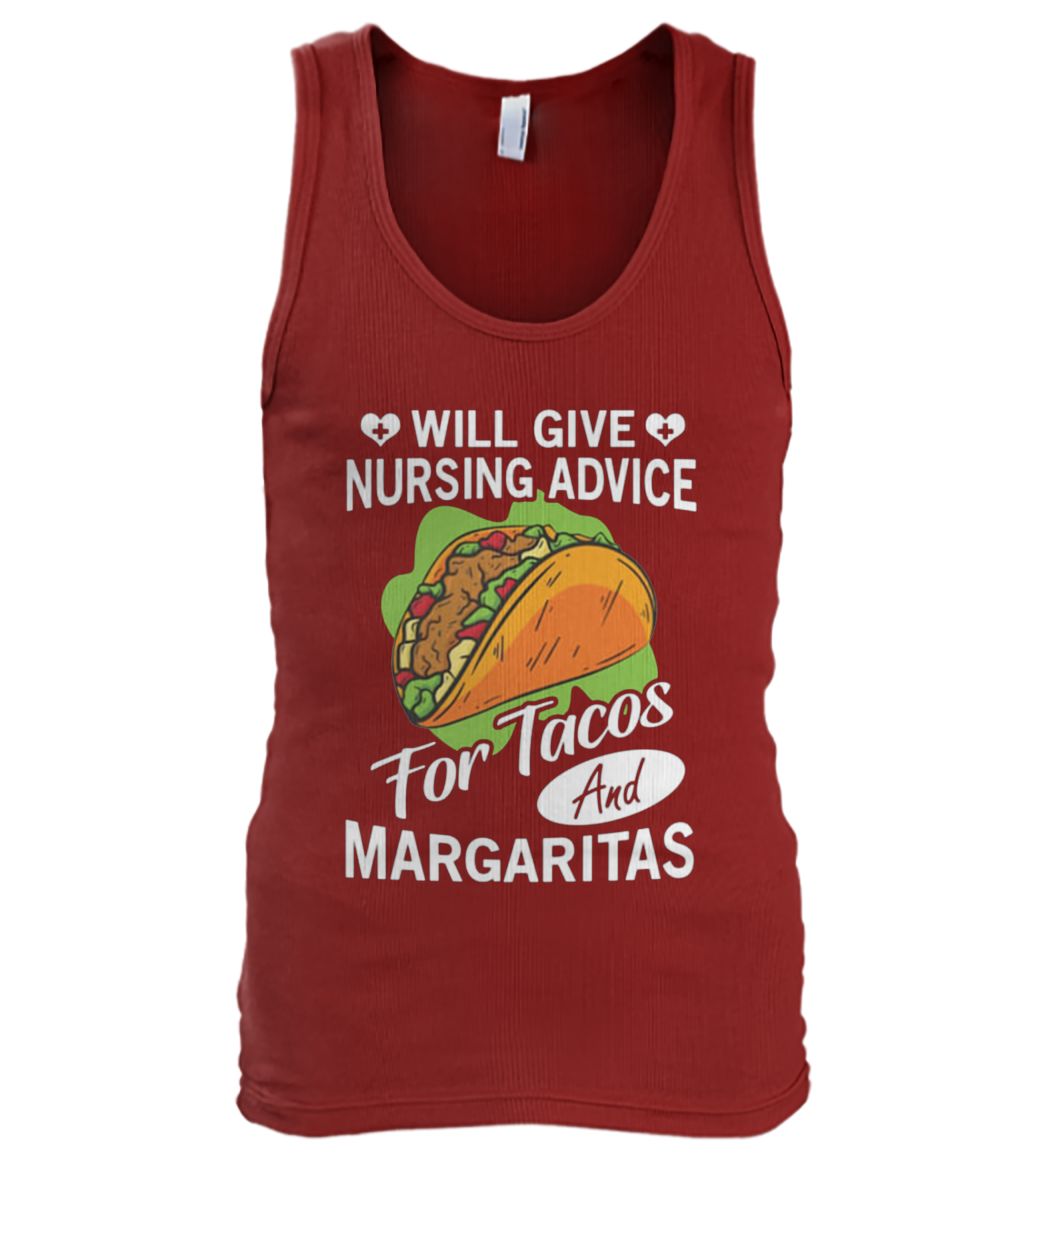 Will give nursing advice for tacos margaritas men's tank top